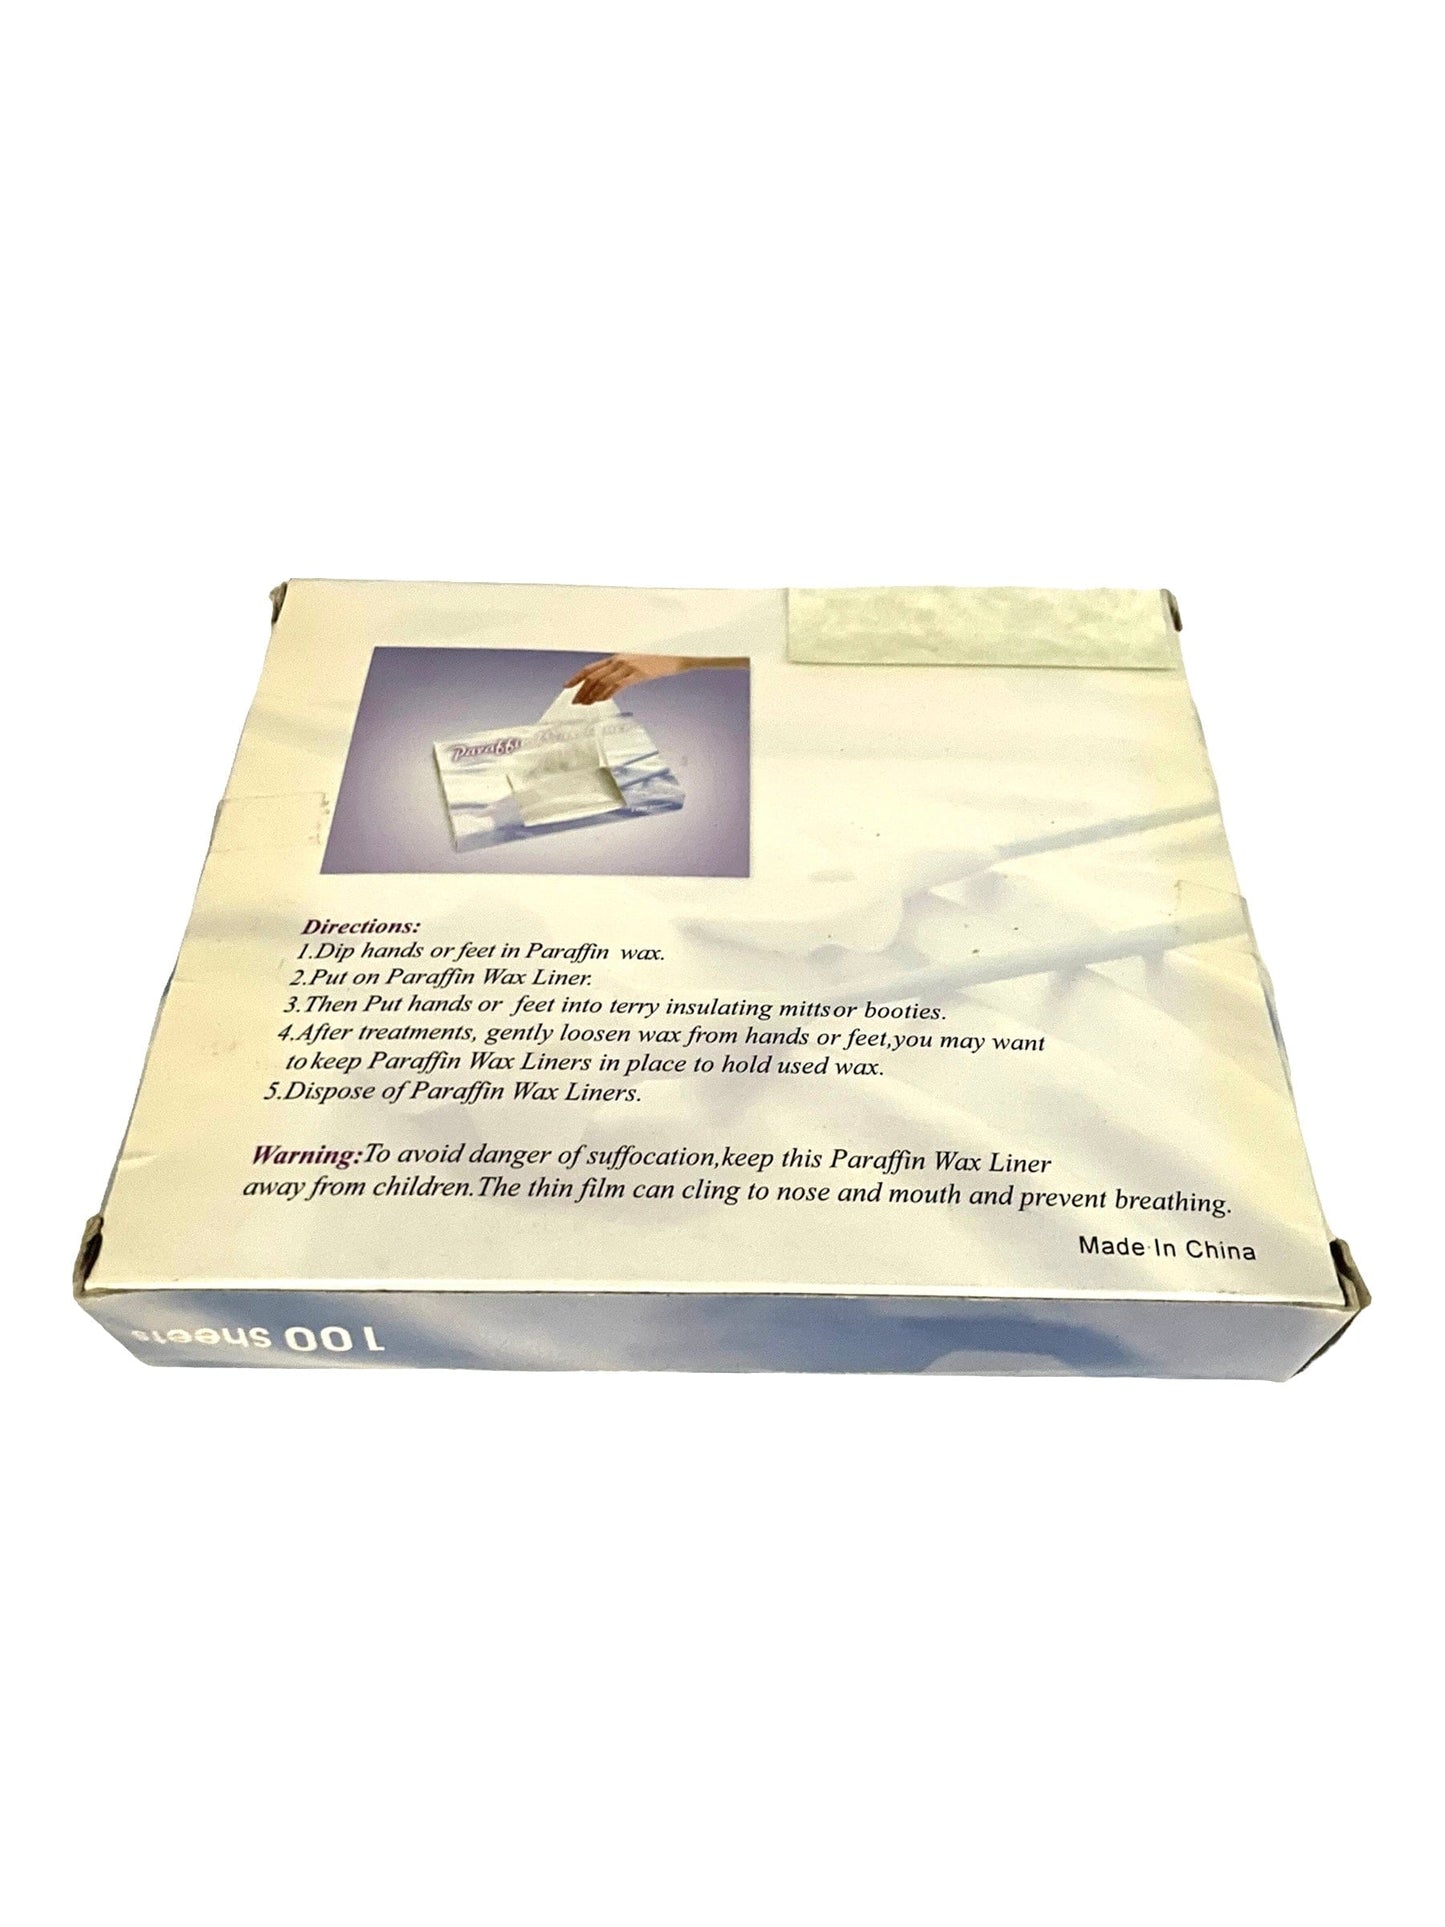 Disposable Paraffin Plastic Liners 100 Count Paraffin Liners